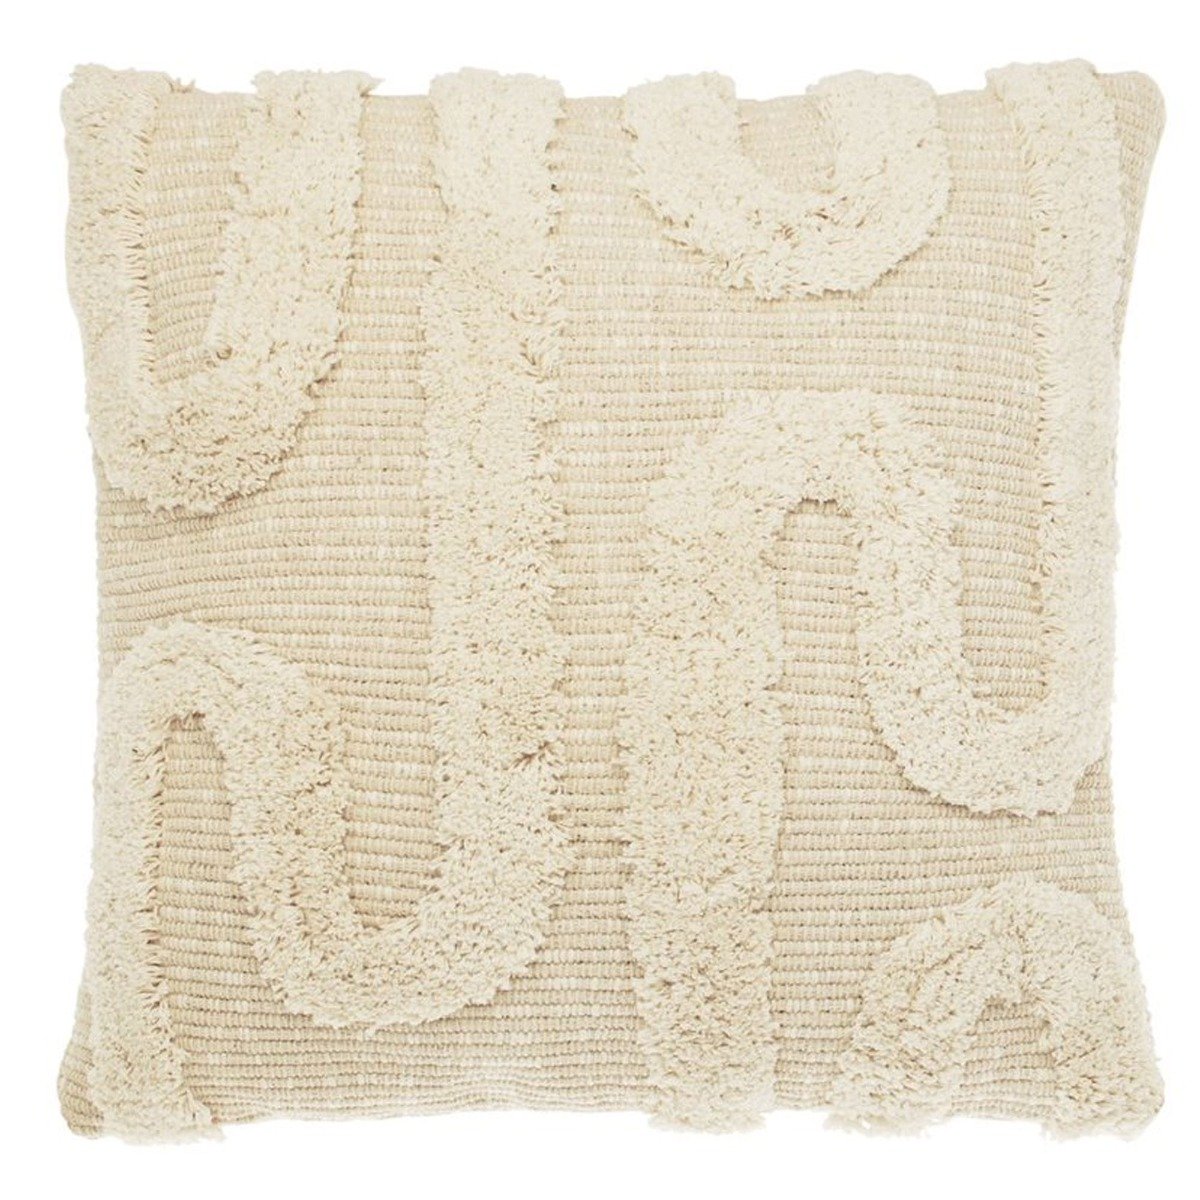 Tufted Curve Cushion, Square, Neutral | Barker & Stonehouse